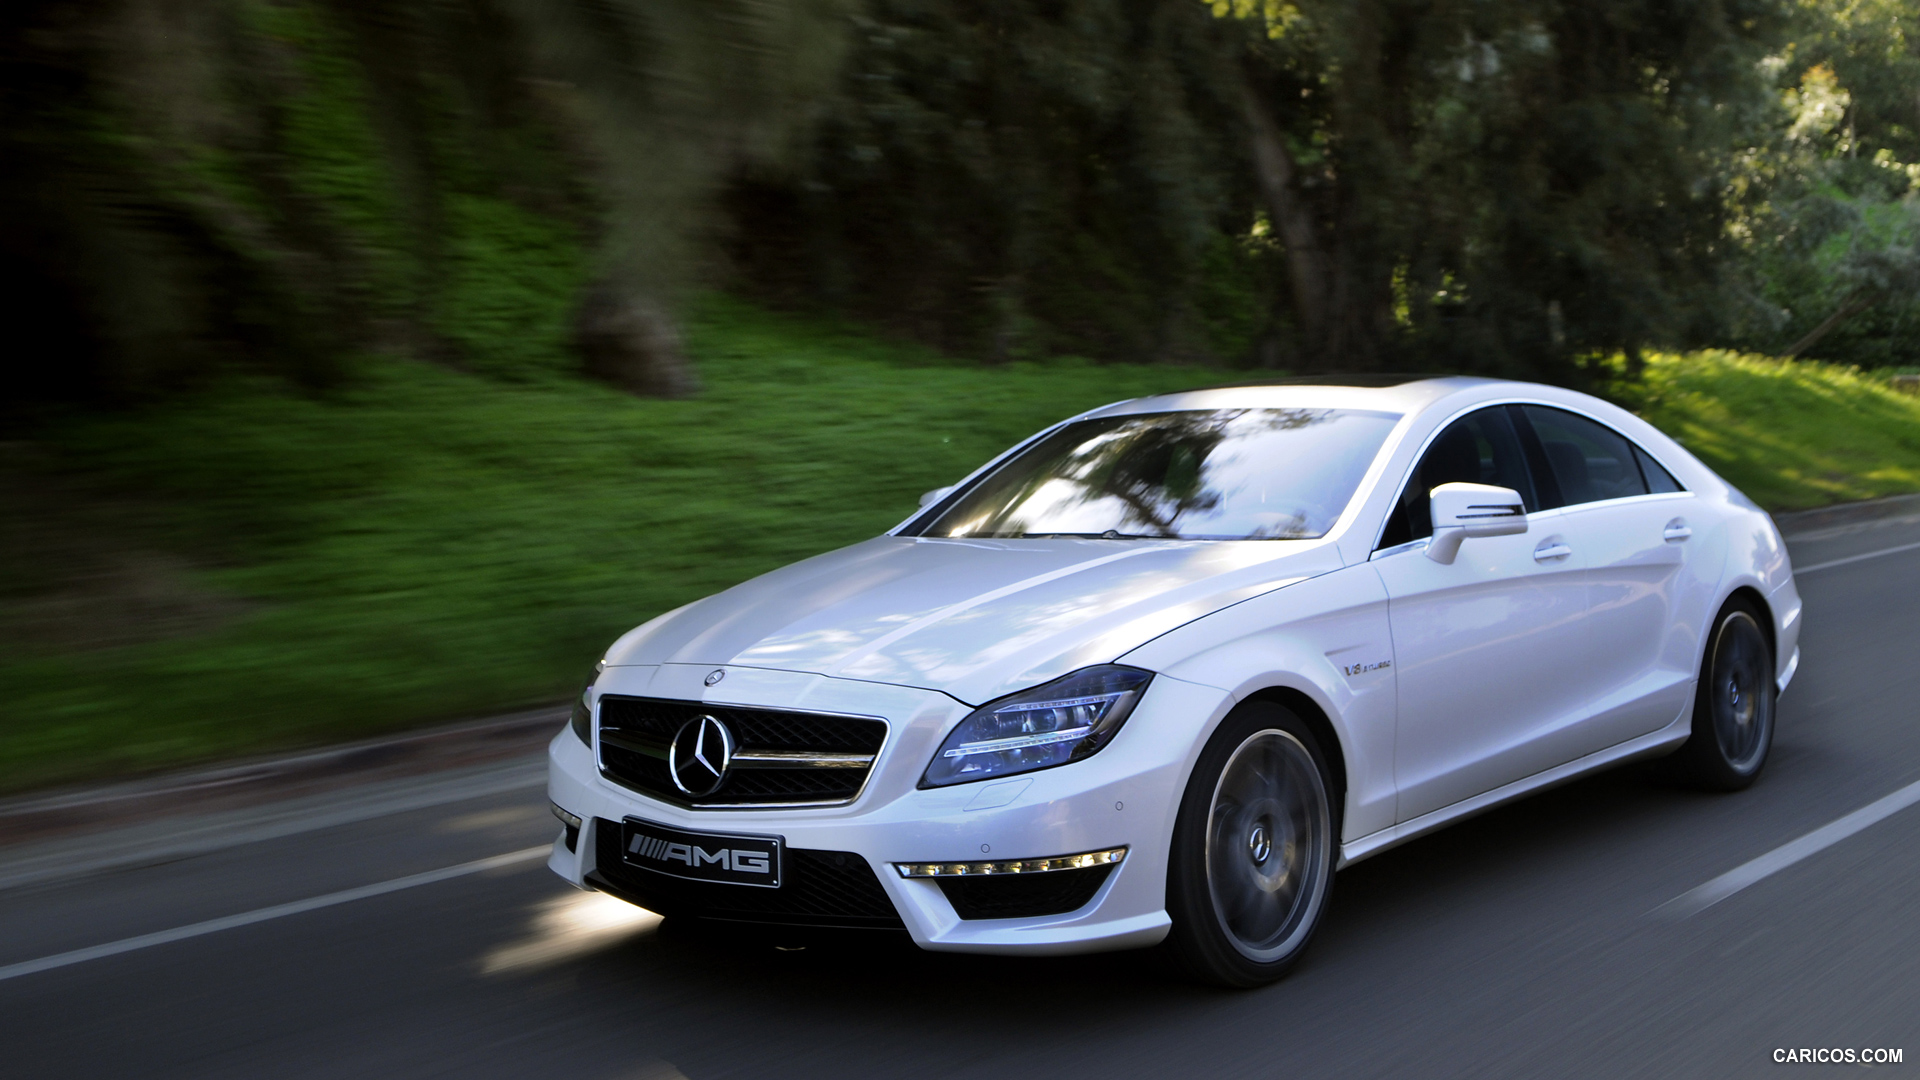 Mercedes-Benz CLS63 AMG (2012) US-Version - Diamond White - Front , #2 of 100